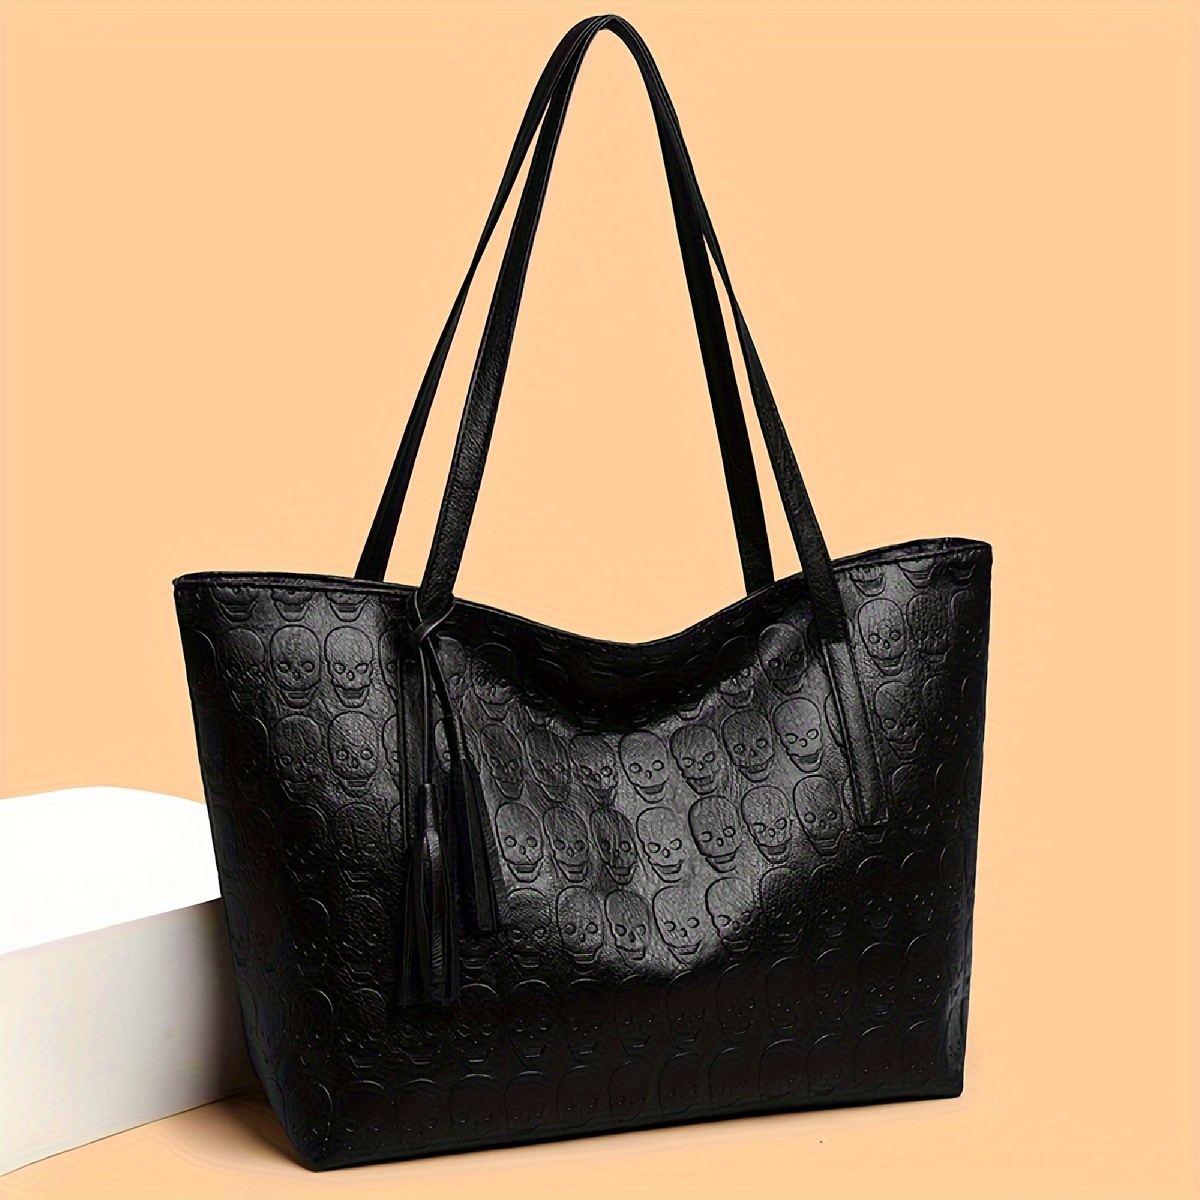 

Fashion Skull Print Tote Bag For Women, Stylish Casual Pu Leather Shoulder Bag With Tassel Detail